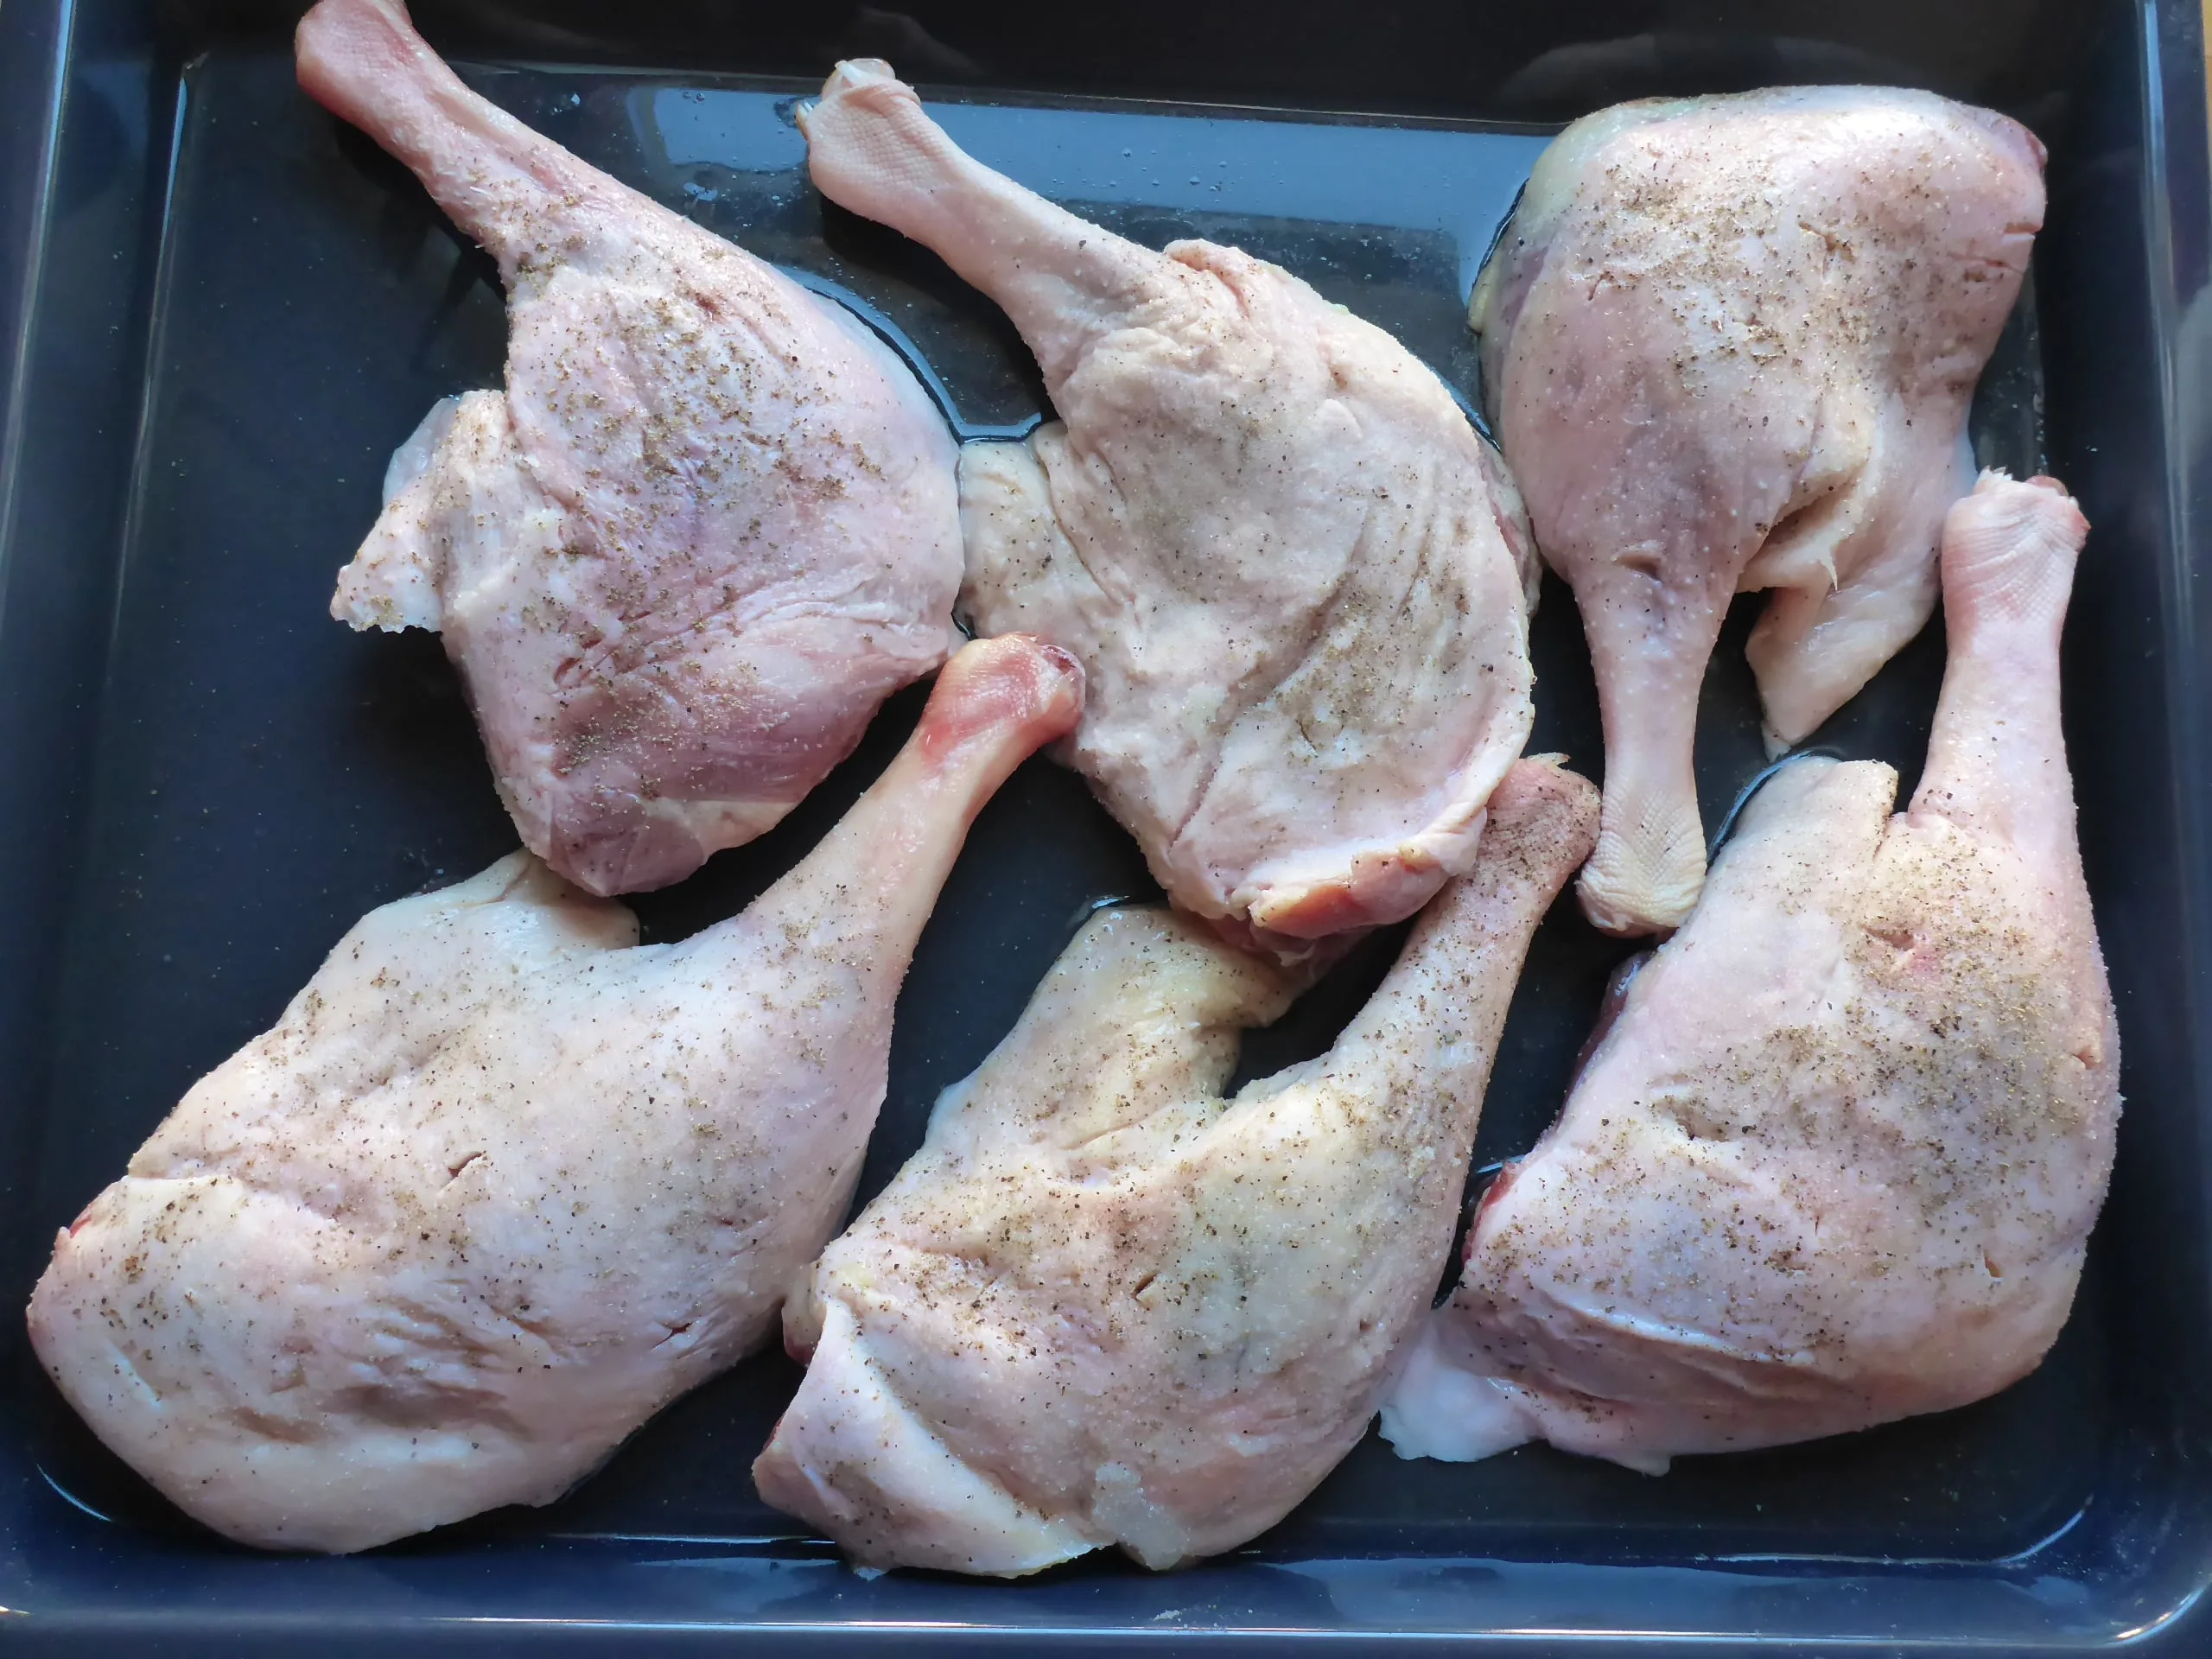 Goose legs arranged on a baking sheet before being placed in the oven to cook.